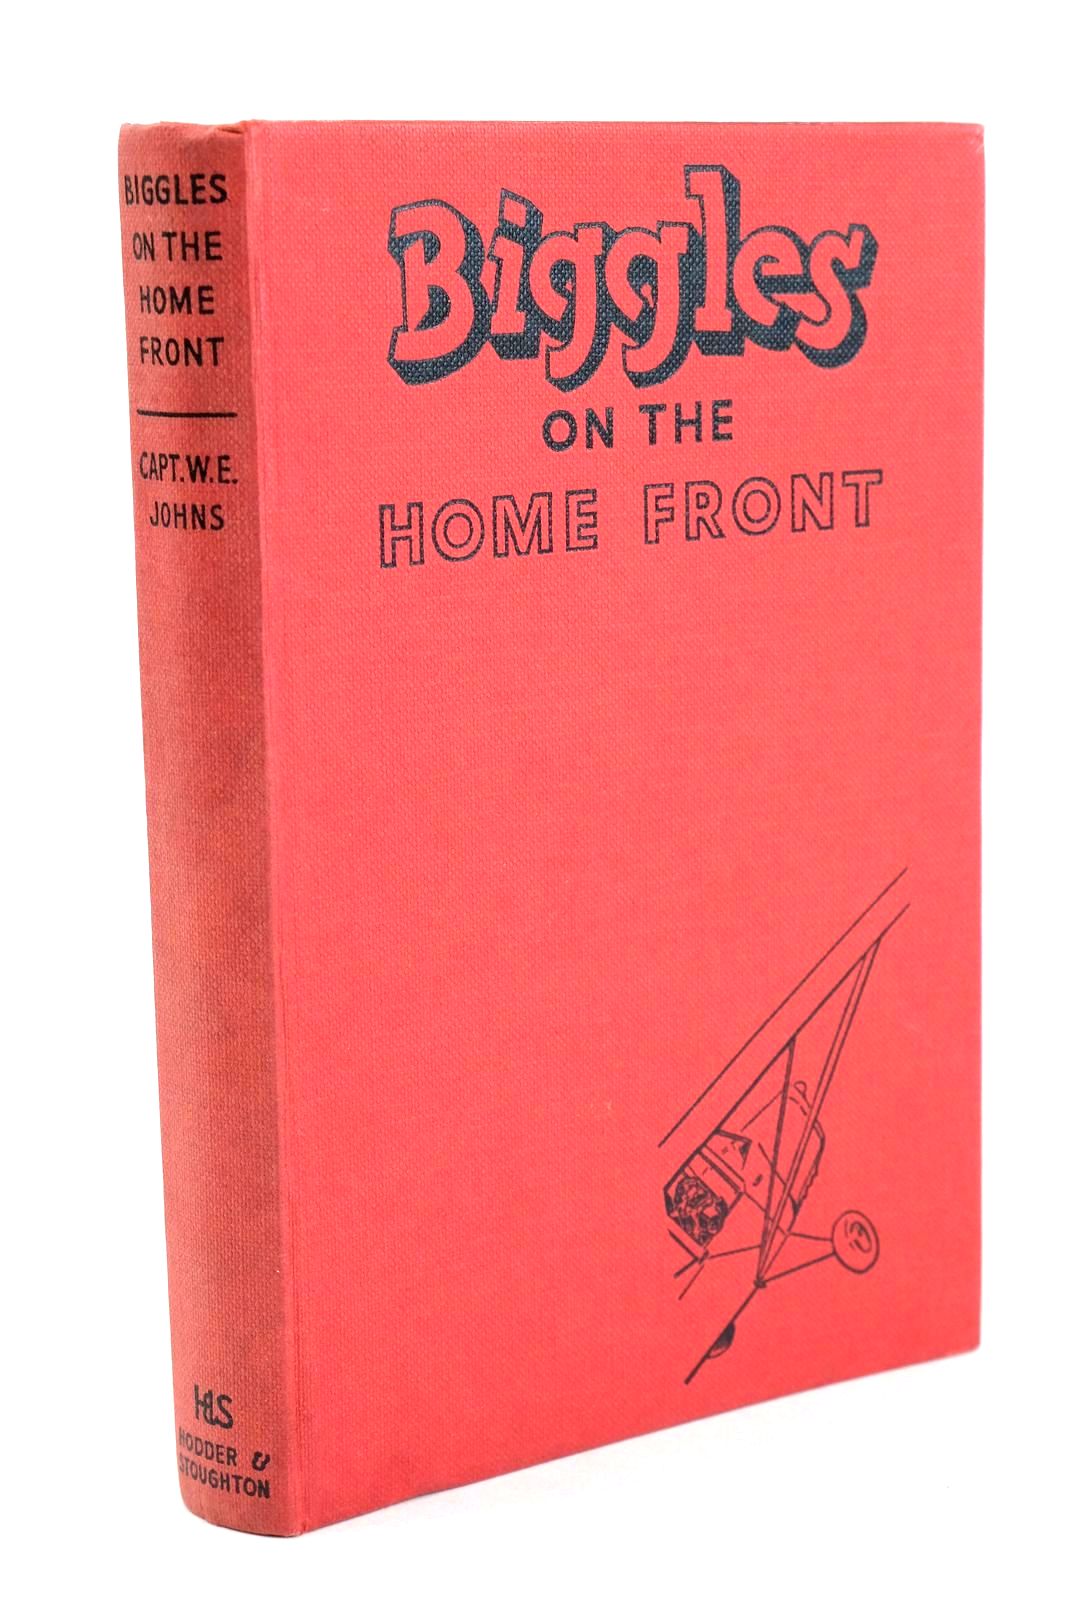 Photo of BIGGLES ON THE HOME FRONT- Stock Number: 1326194